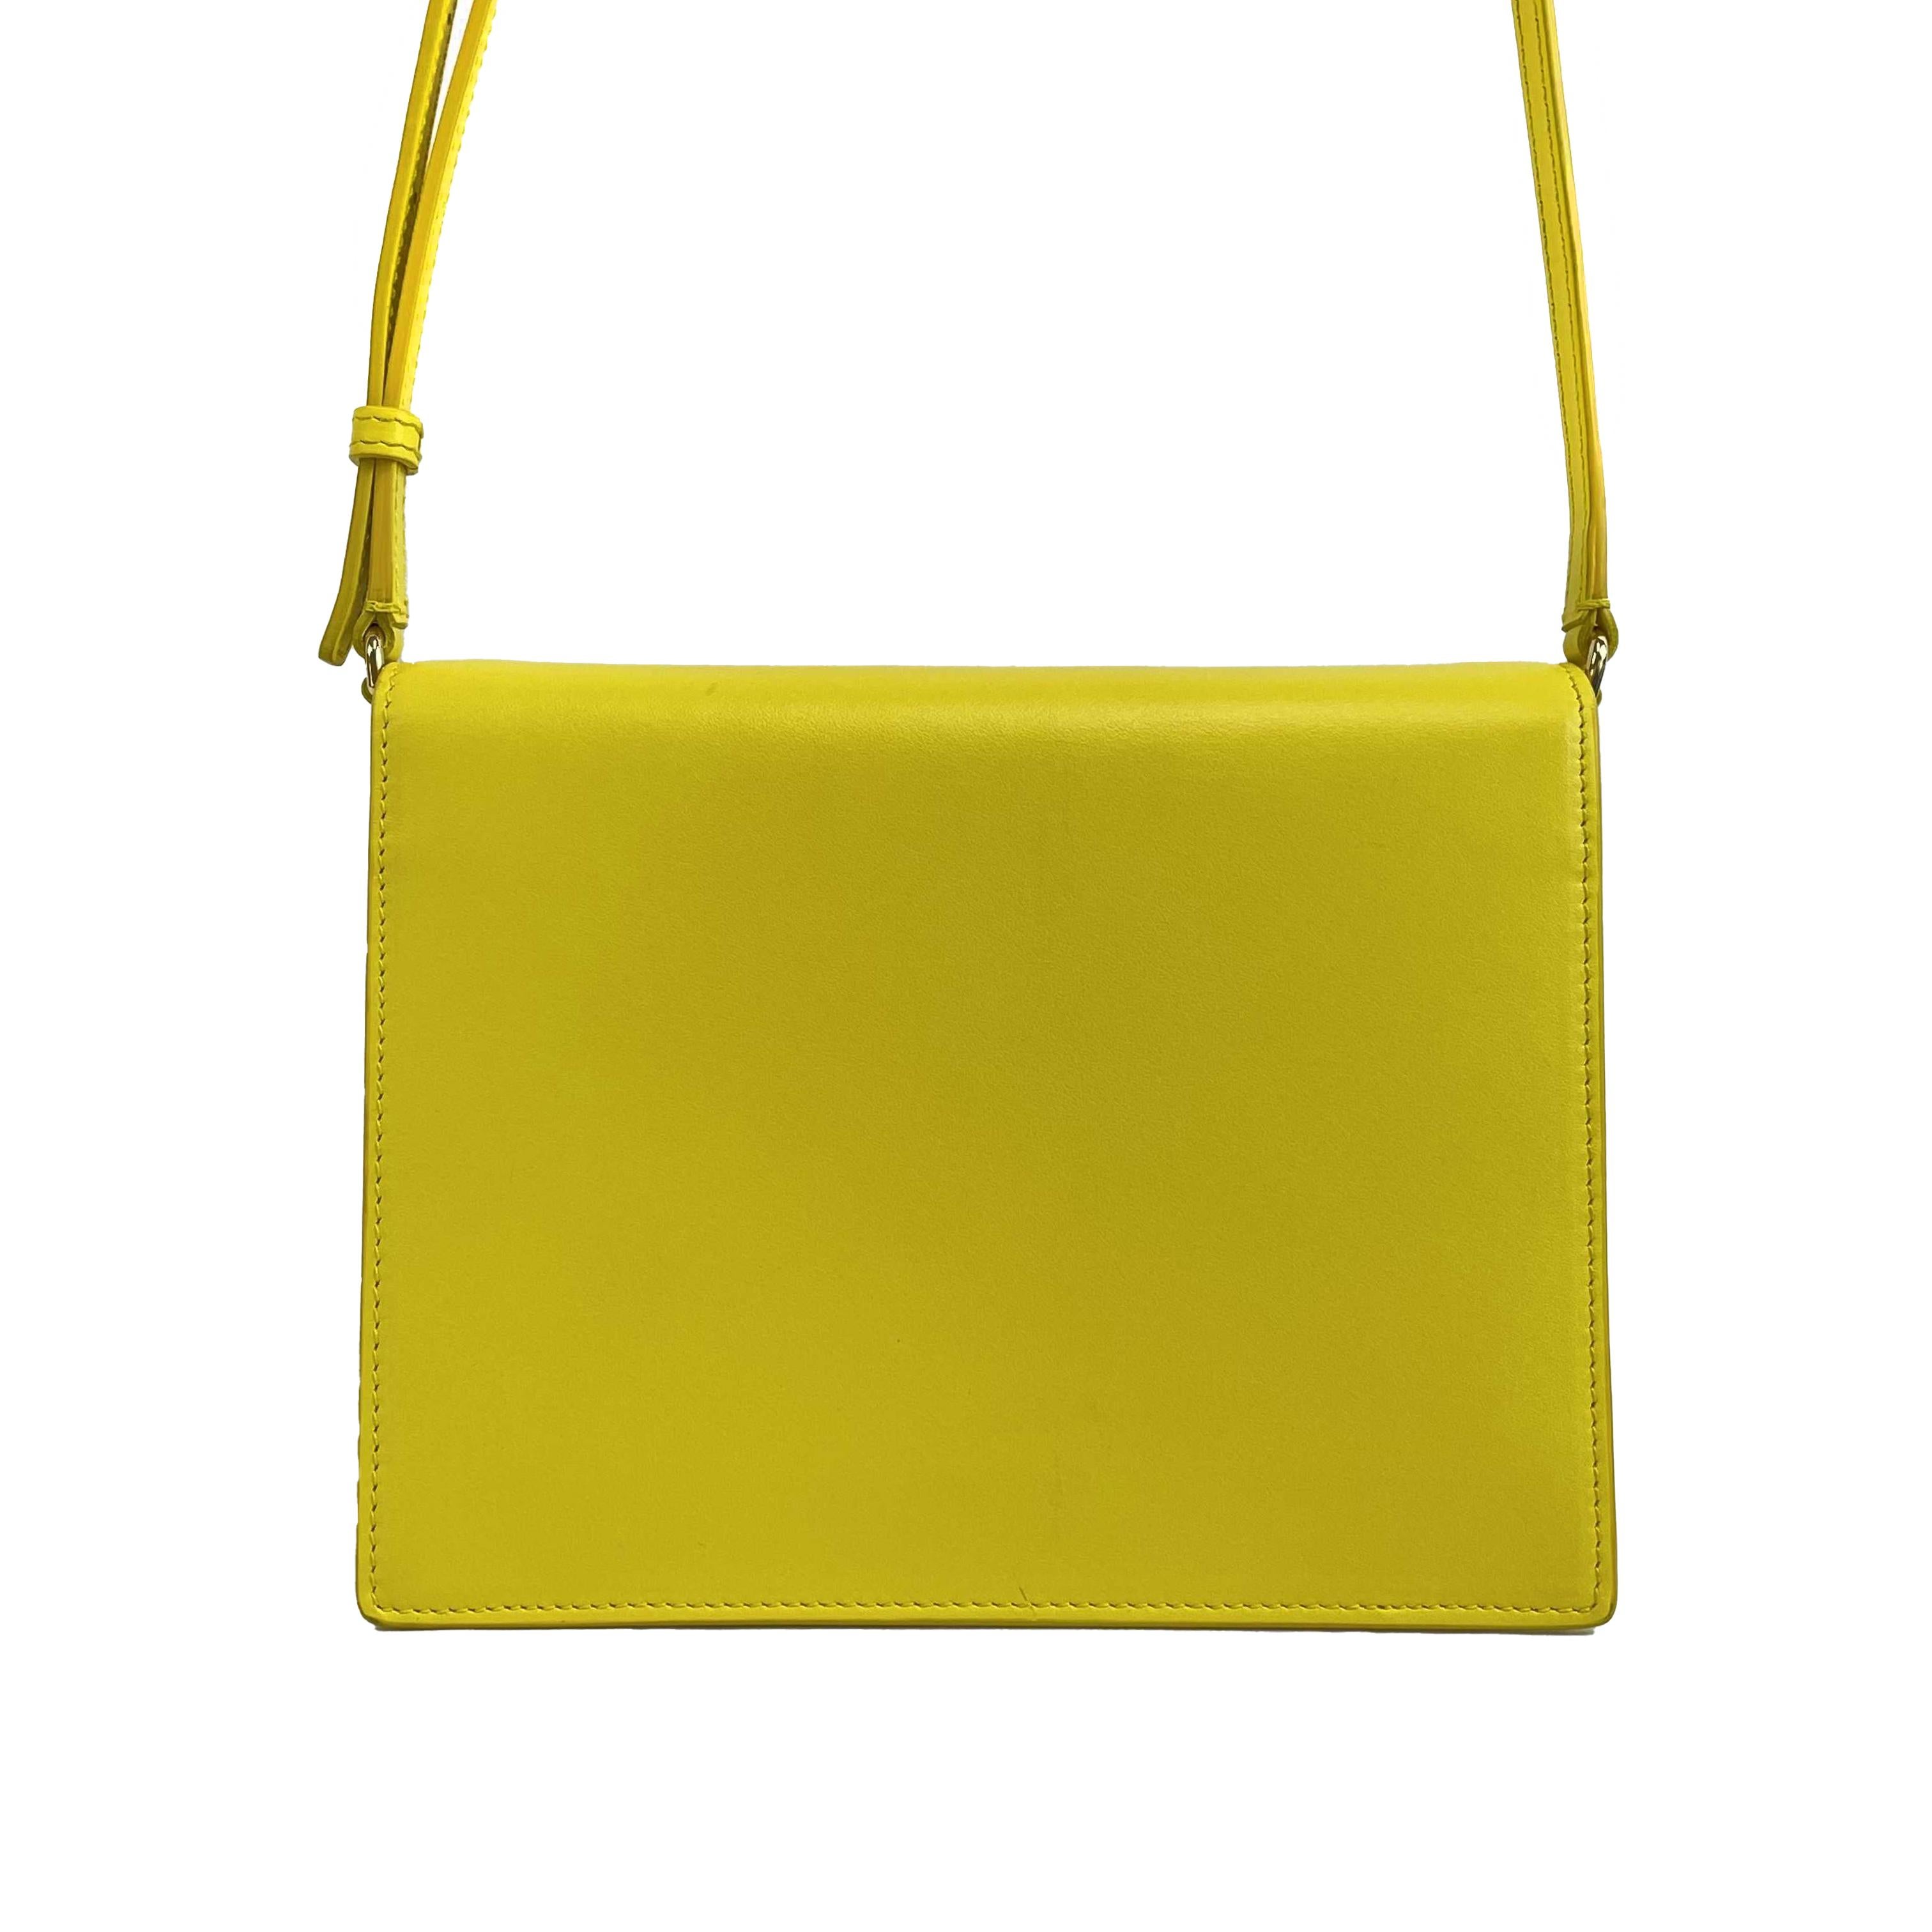 Dolce & Gabbana - NEW DG Logo Yellow Crossbody / Shoulder Bag
Measurements

Width: 7.75 in / 19.685 cm
Height: 5.65 in / 14.351 cm
Depth: 2.5 in / 6.35 cm
Strap Drop: 19.5 - 23.5 in / 49.53 cm
Details

Made In: Italy
Color: Yellow
Accessories: Dust